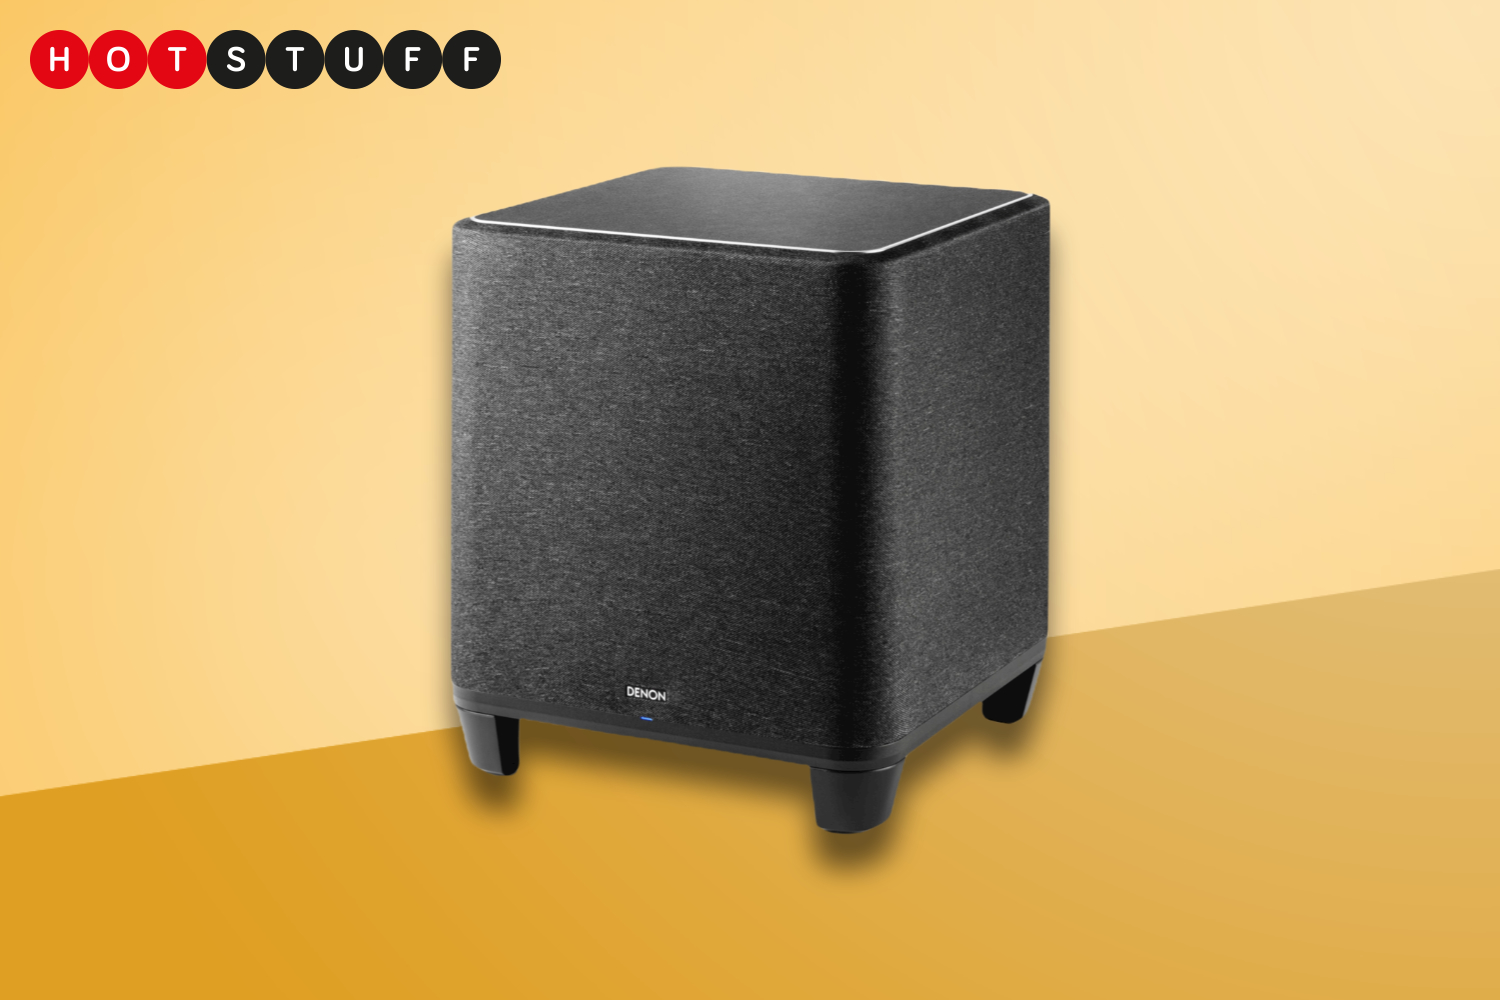 Denon's new wireless subwoofer to add deep bass to your home entertainment | Stuff